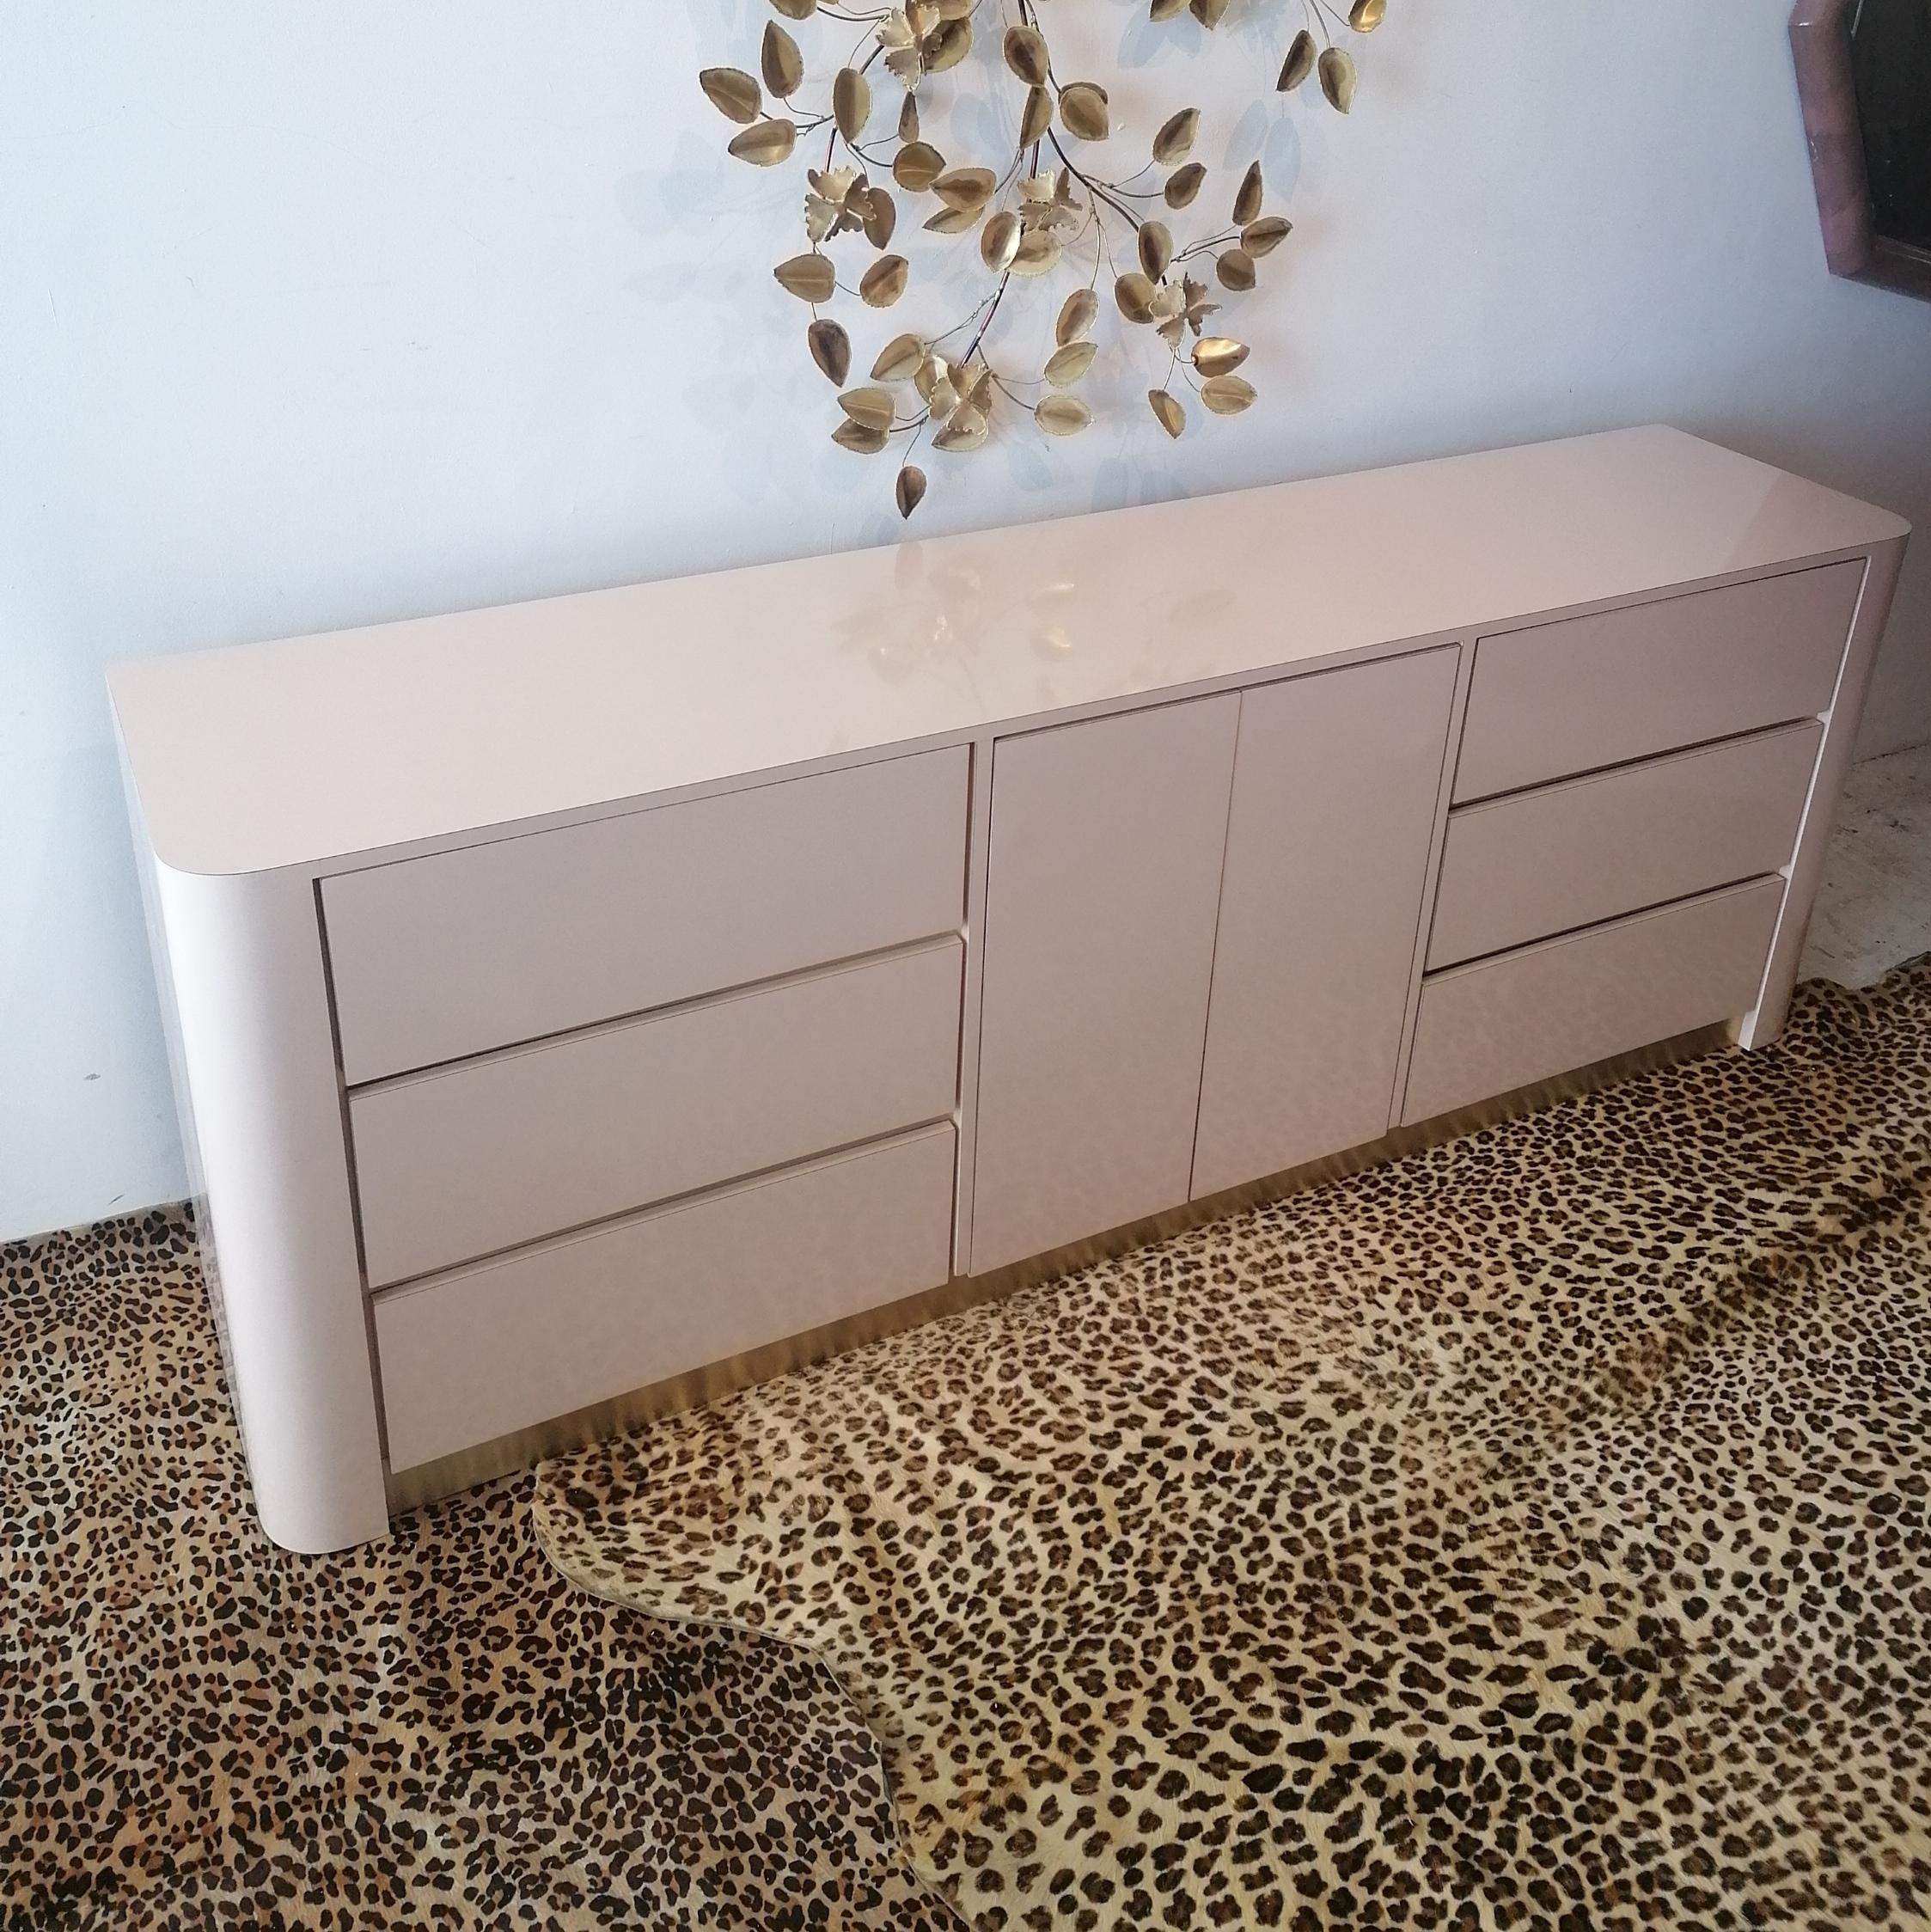 Long postmodern 1980s American pale blush pink laminate sideboard / dresser with drawers. Gold metal trim between drawers and along base.
Three drawers left and right. Central doors open to reveal three inner drawers.
In great condition- just a